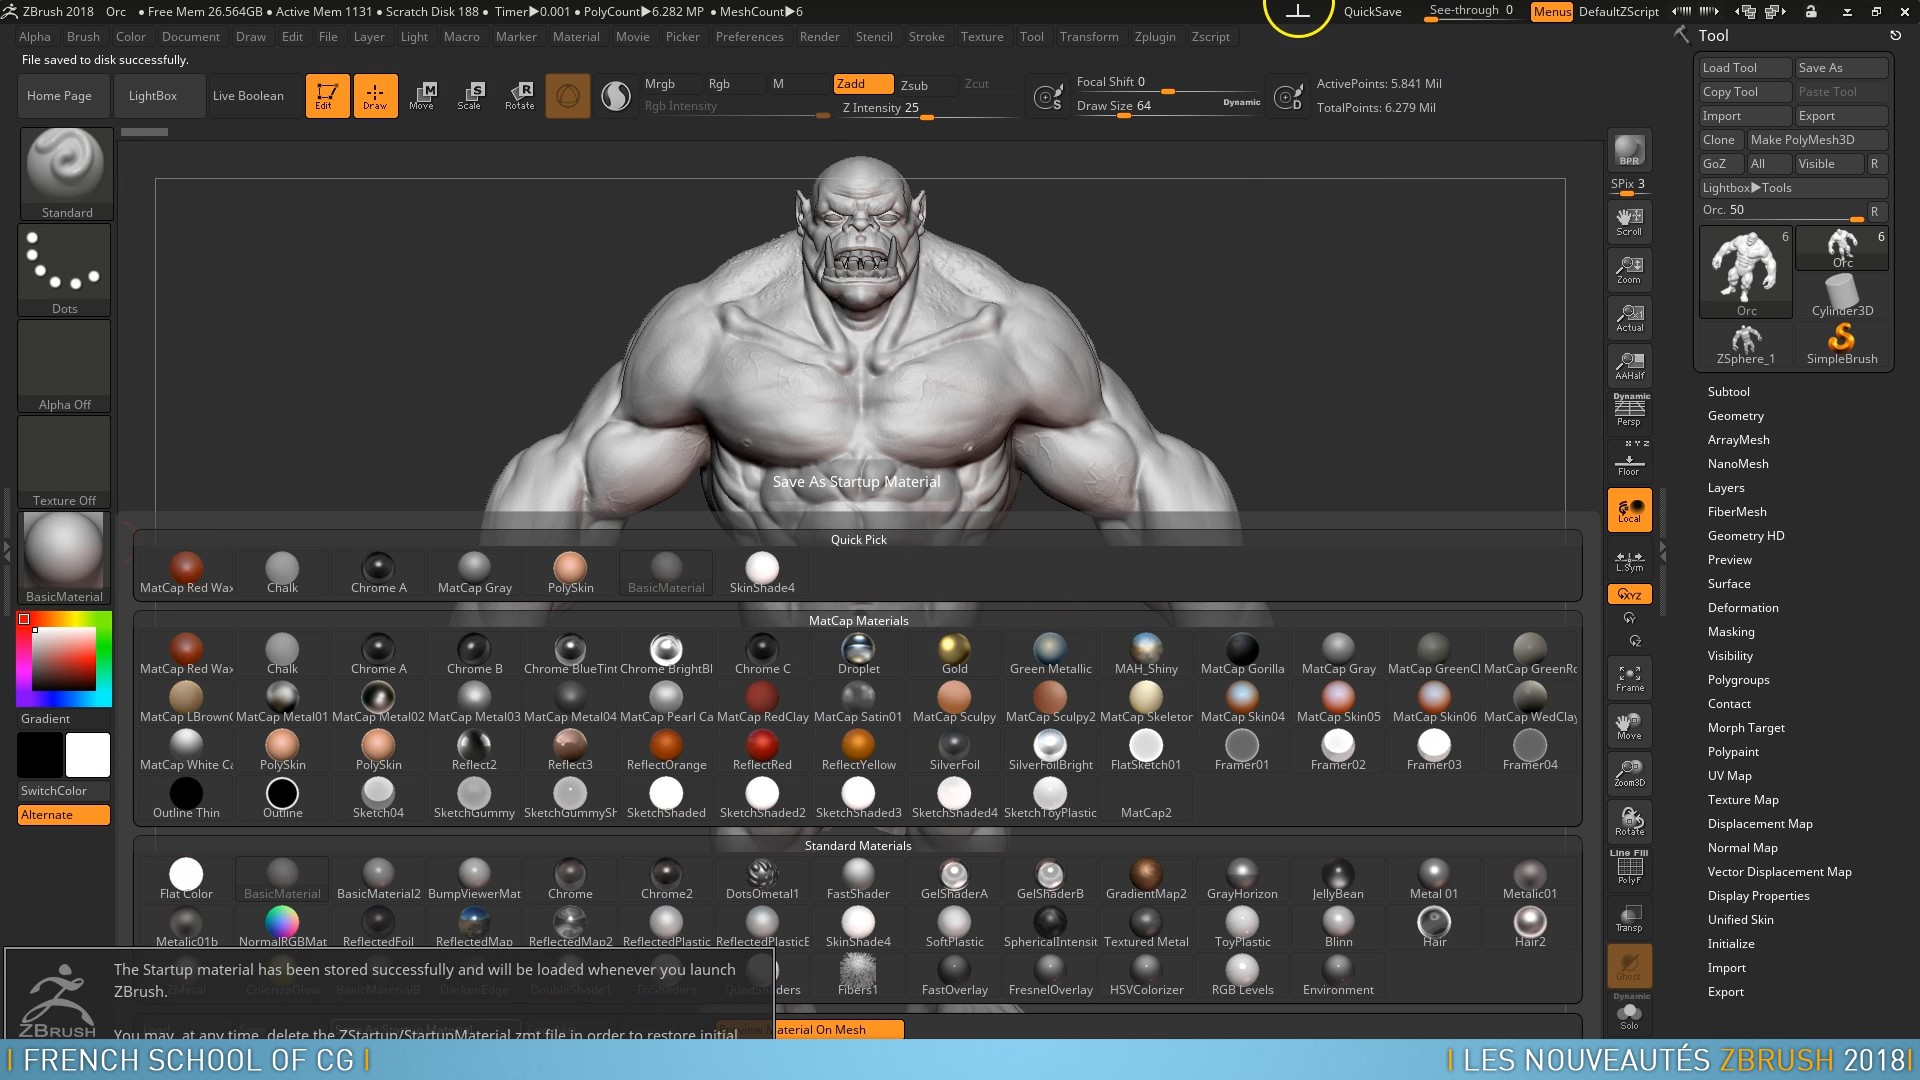 is zbrush 2018 and zbrush 2018core different